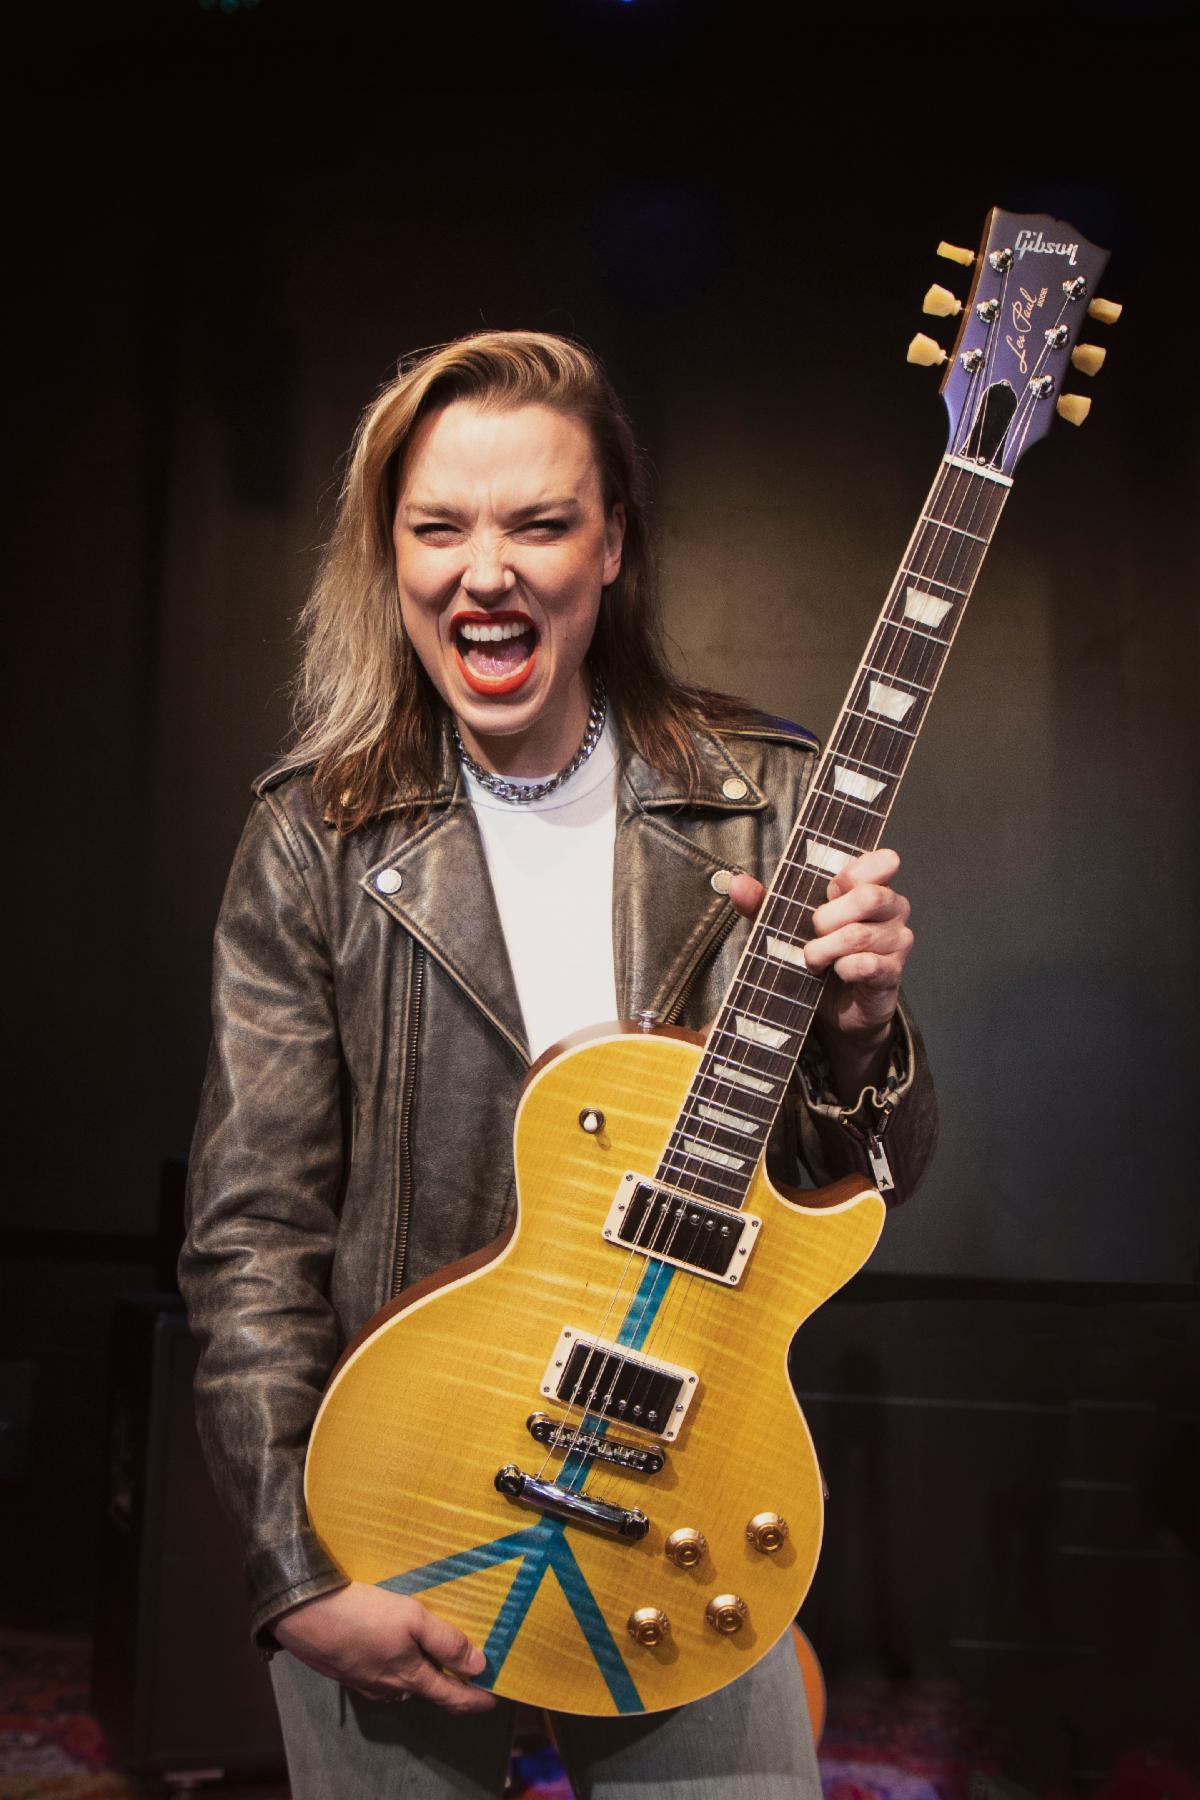 Gibson Ambassador Lzzy Hale of Halestorm is pictured with a Gibson Guitars For Peace Les Paul.